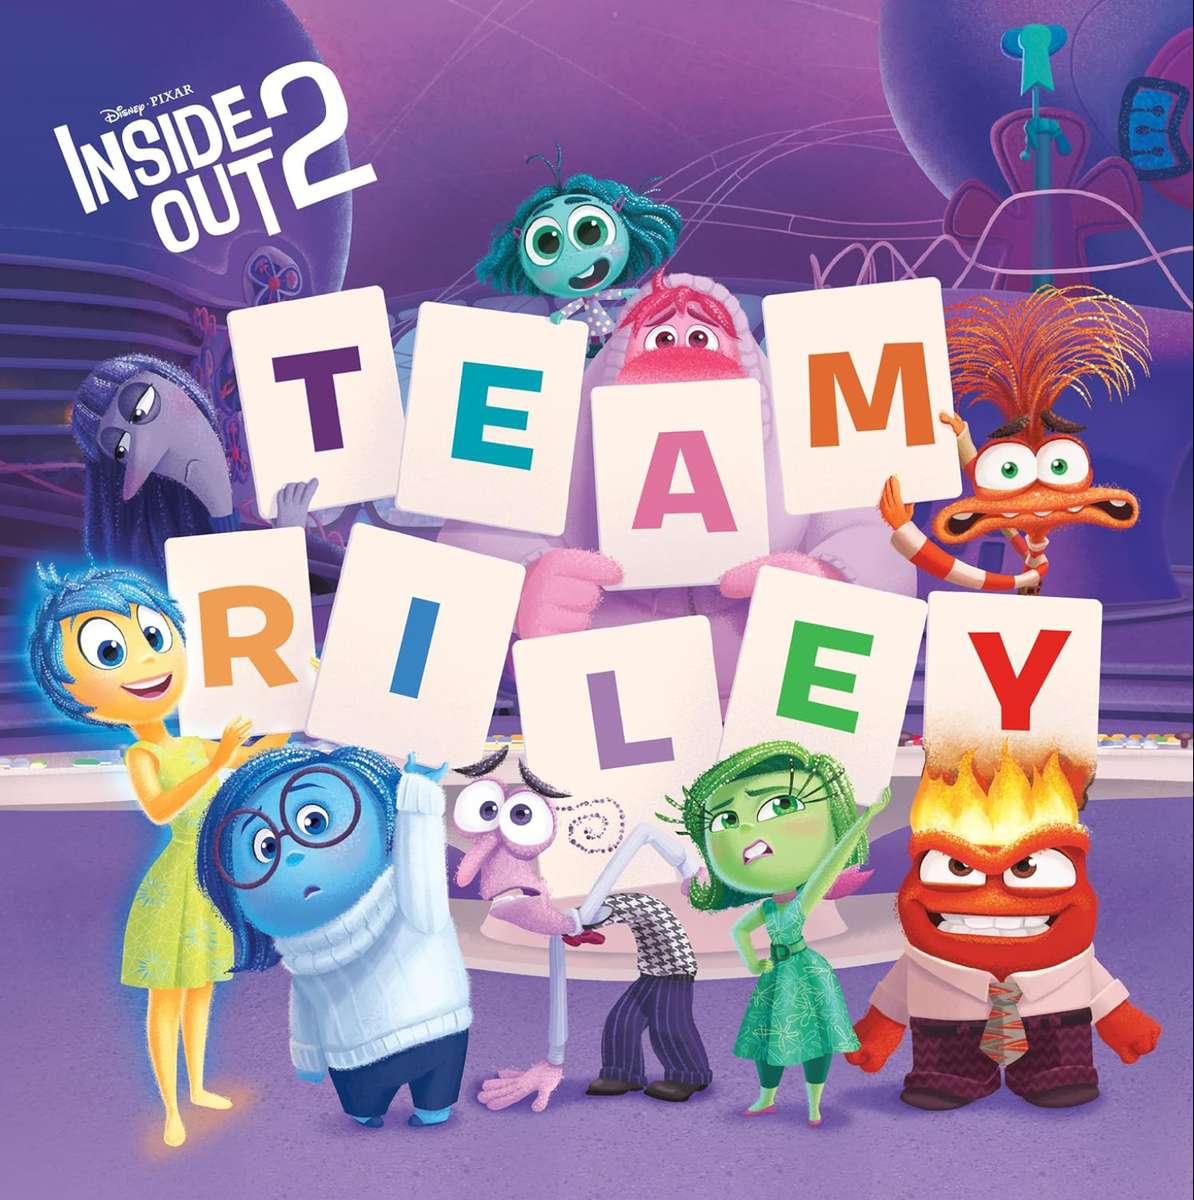 Inside Out 2 Pictureback Book❤️❤️❤️❤️ puzzle online